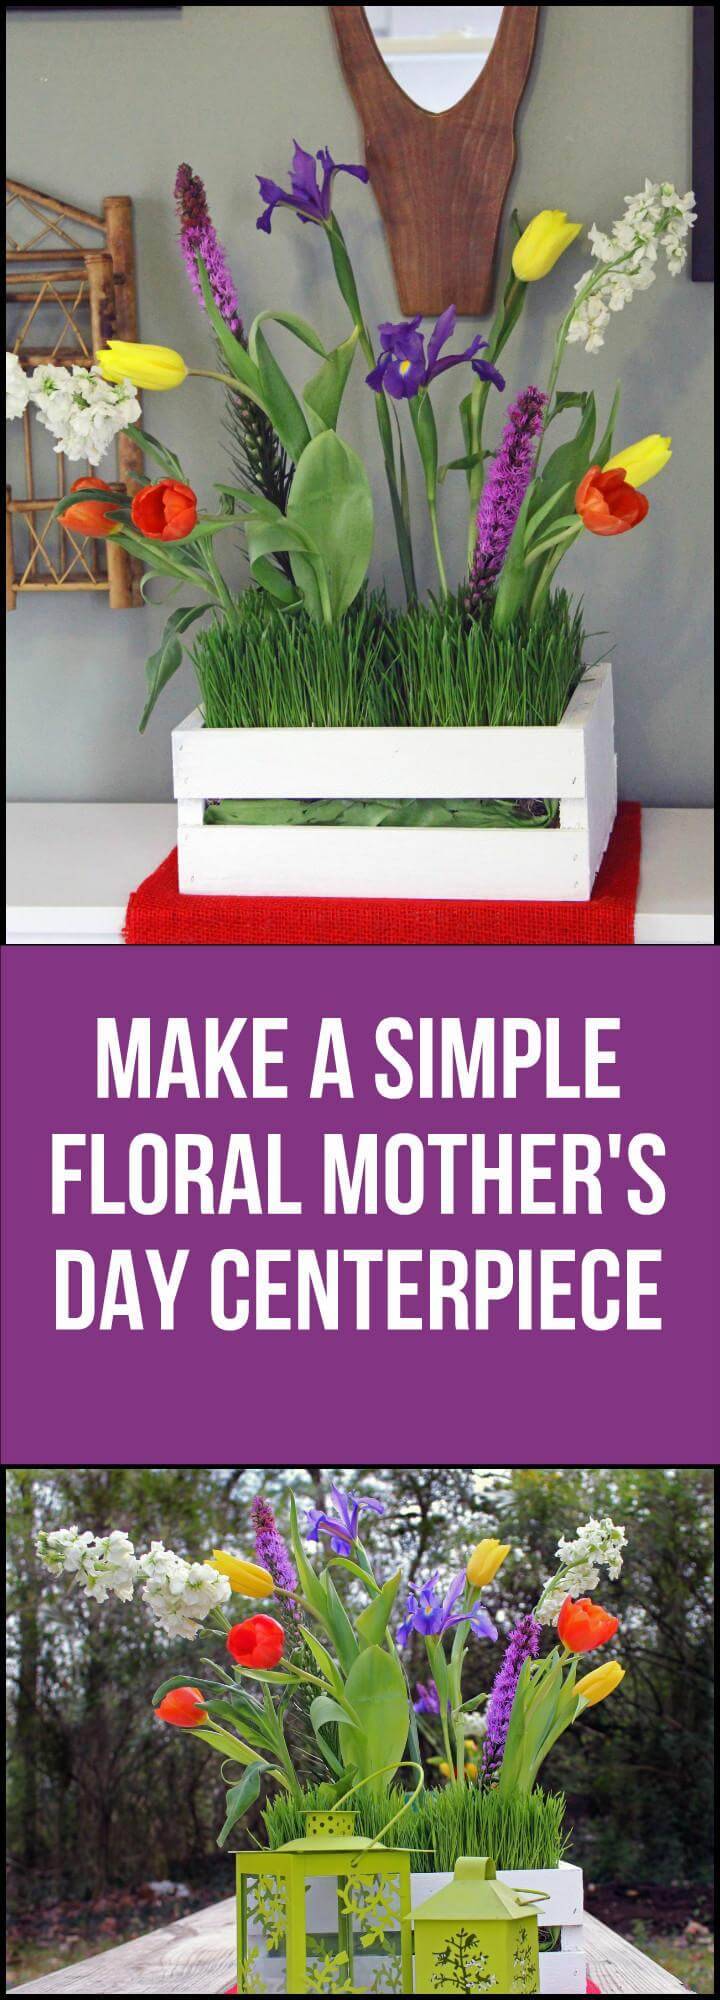 DIY floral Mother's Day centerpiece